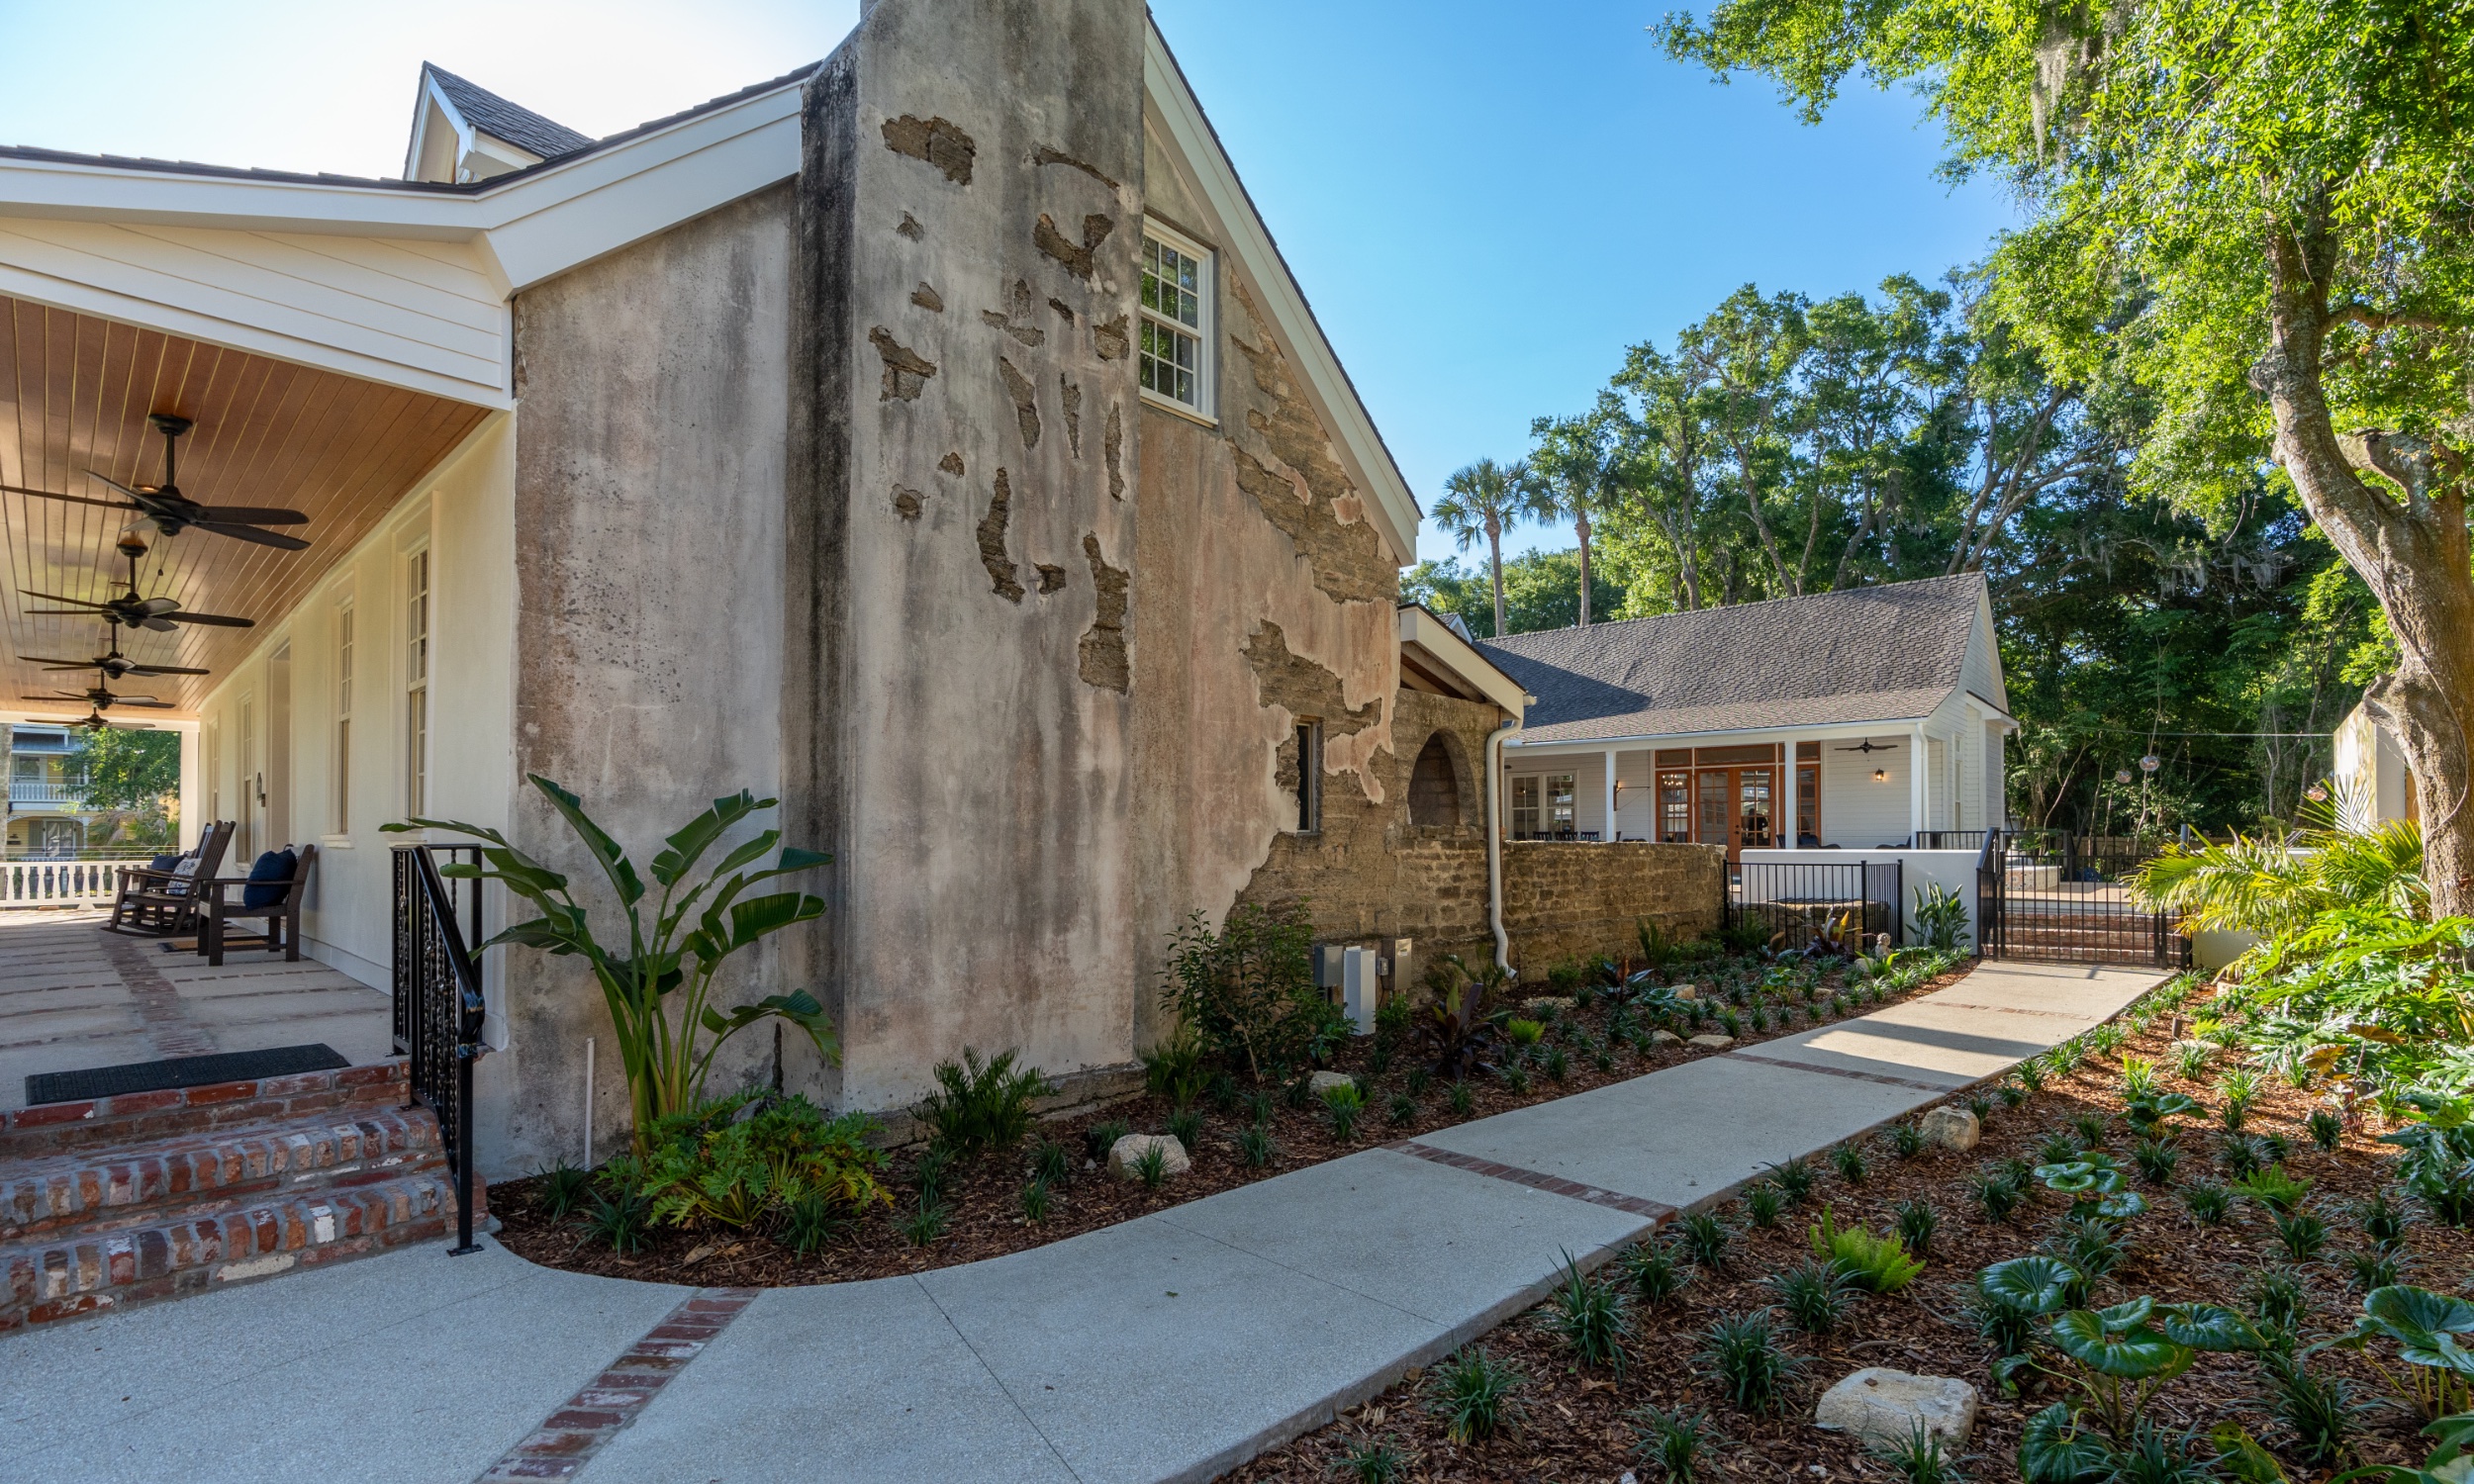 The exterior of a restored building in Lincolnville shows the original coquina wall